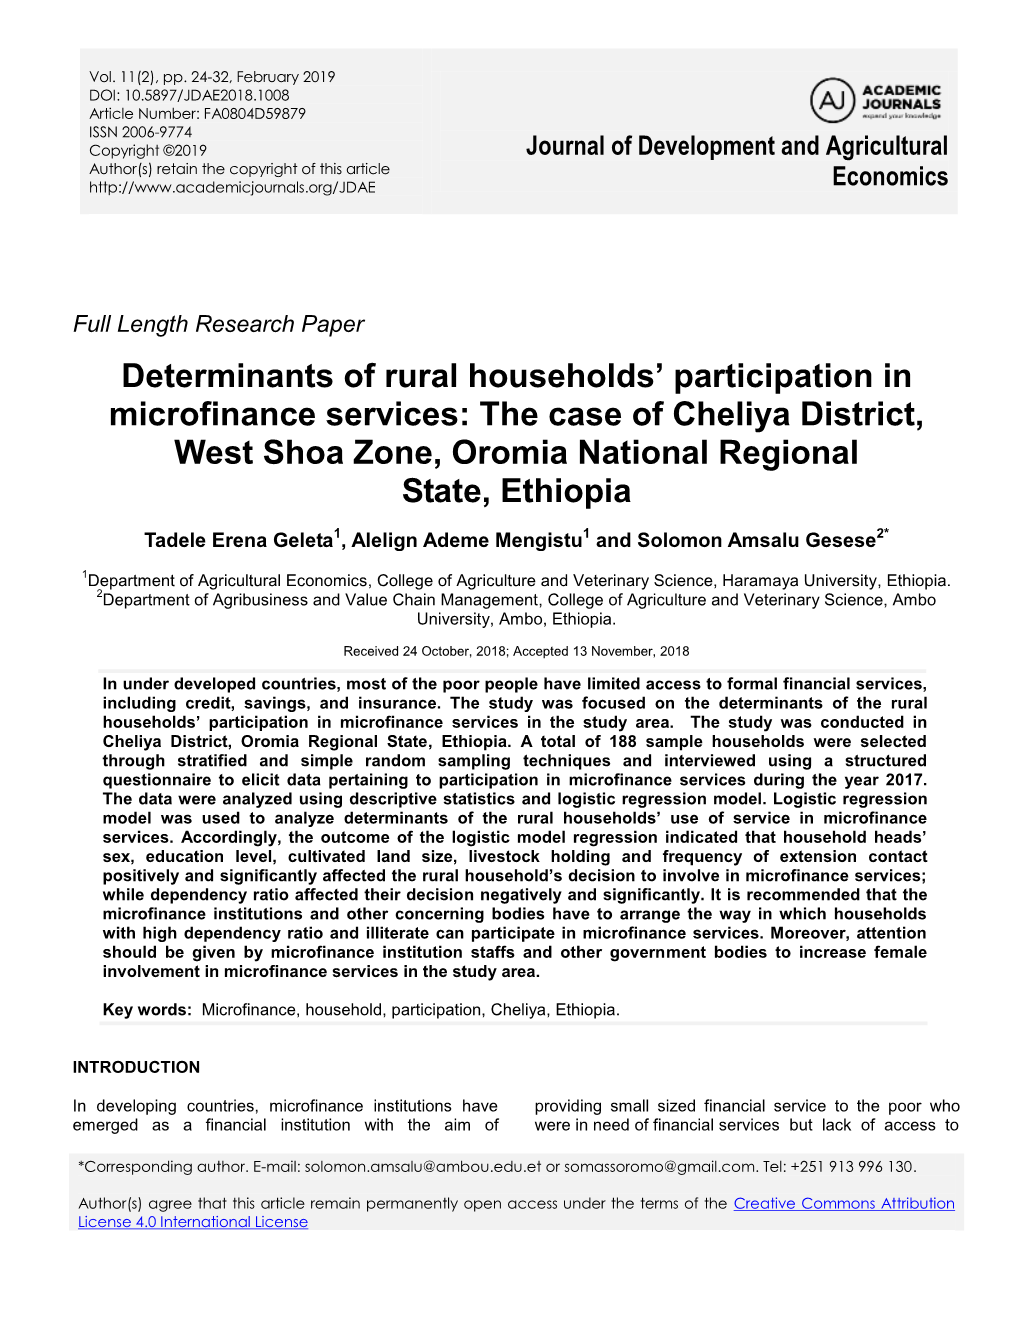 Determinants of Rural Households' Participation in Microfinance Services